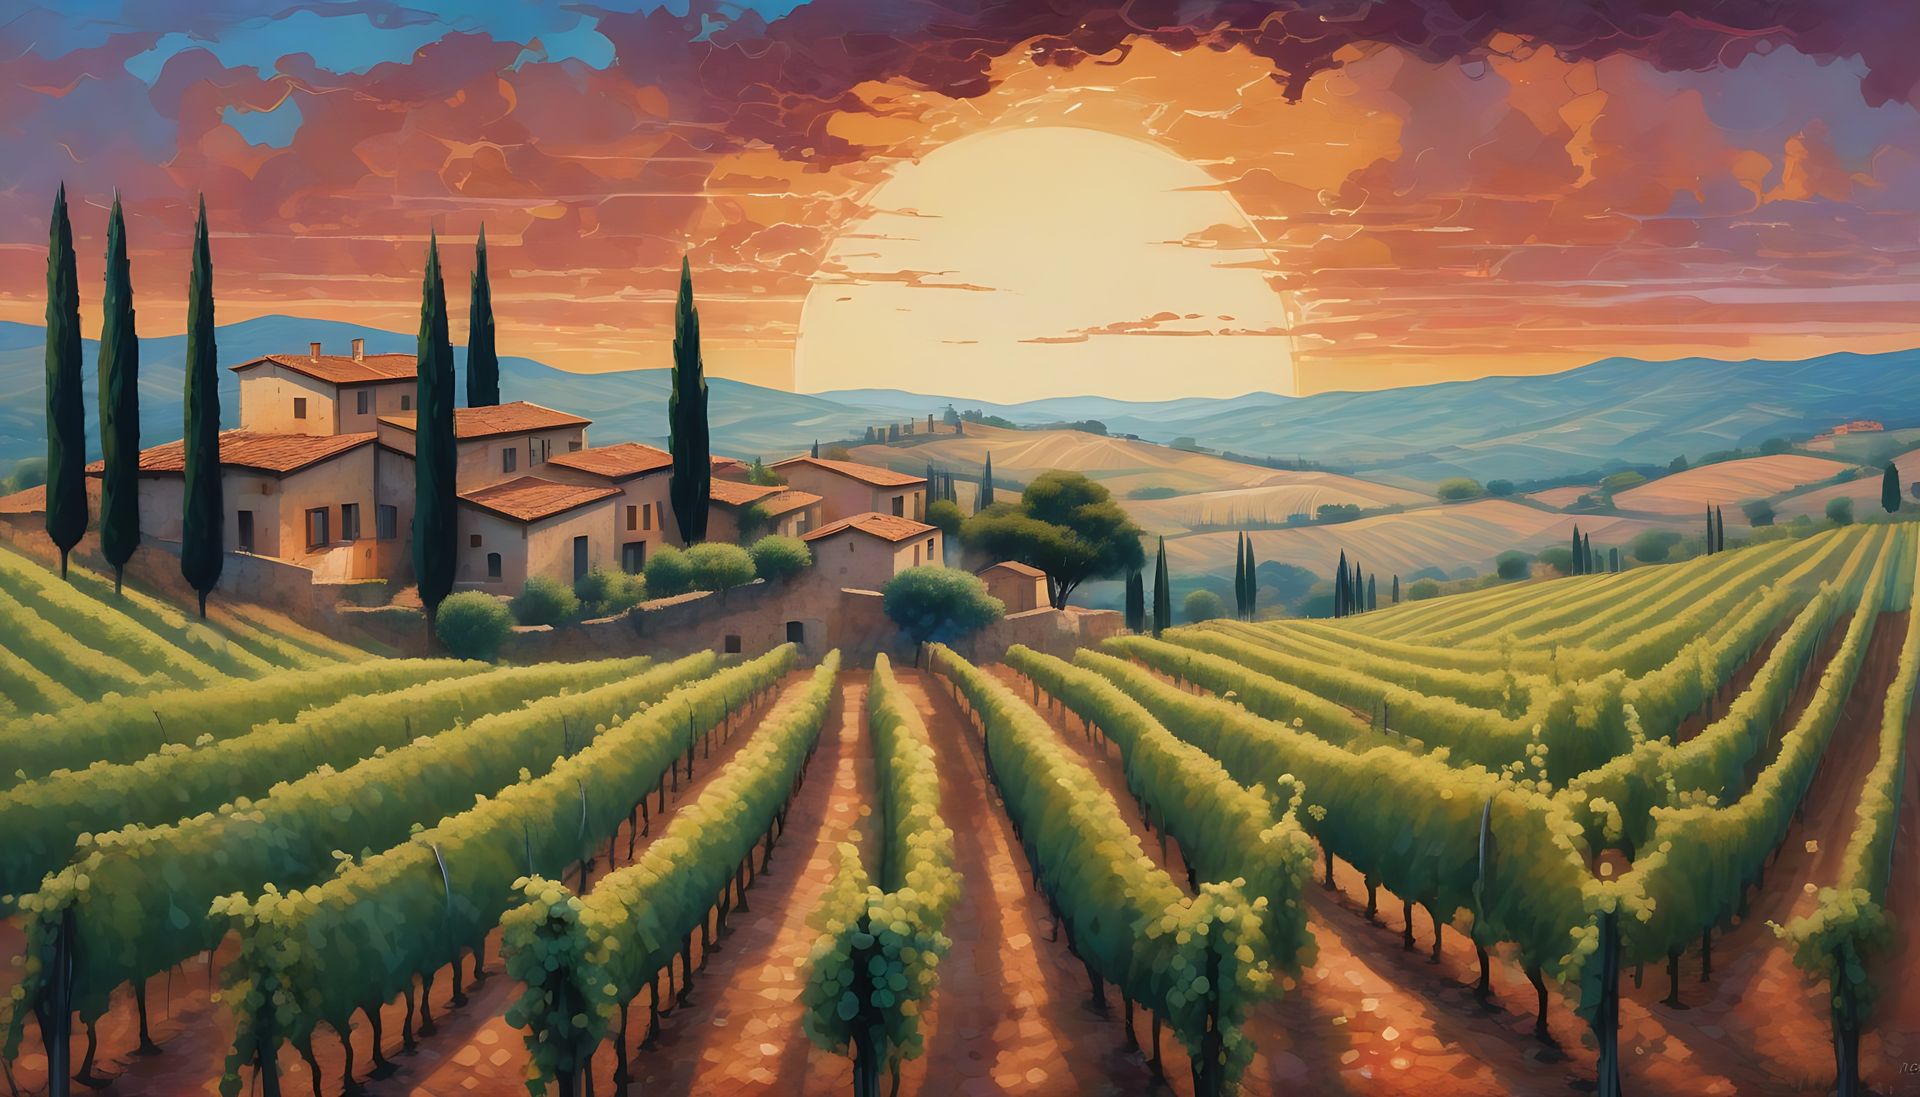 A picturesque Tuscan vineyard at sunset  with rolling hills and rows of grapevines - reflecting the serene beauty and tradition of Wine From Tuscany | image credit: Merasturda Enkeste